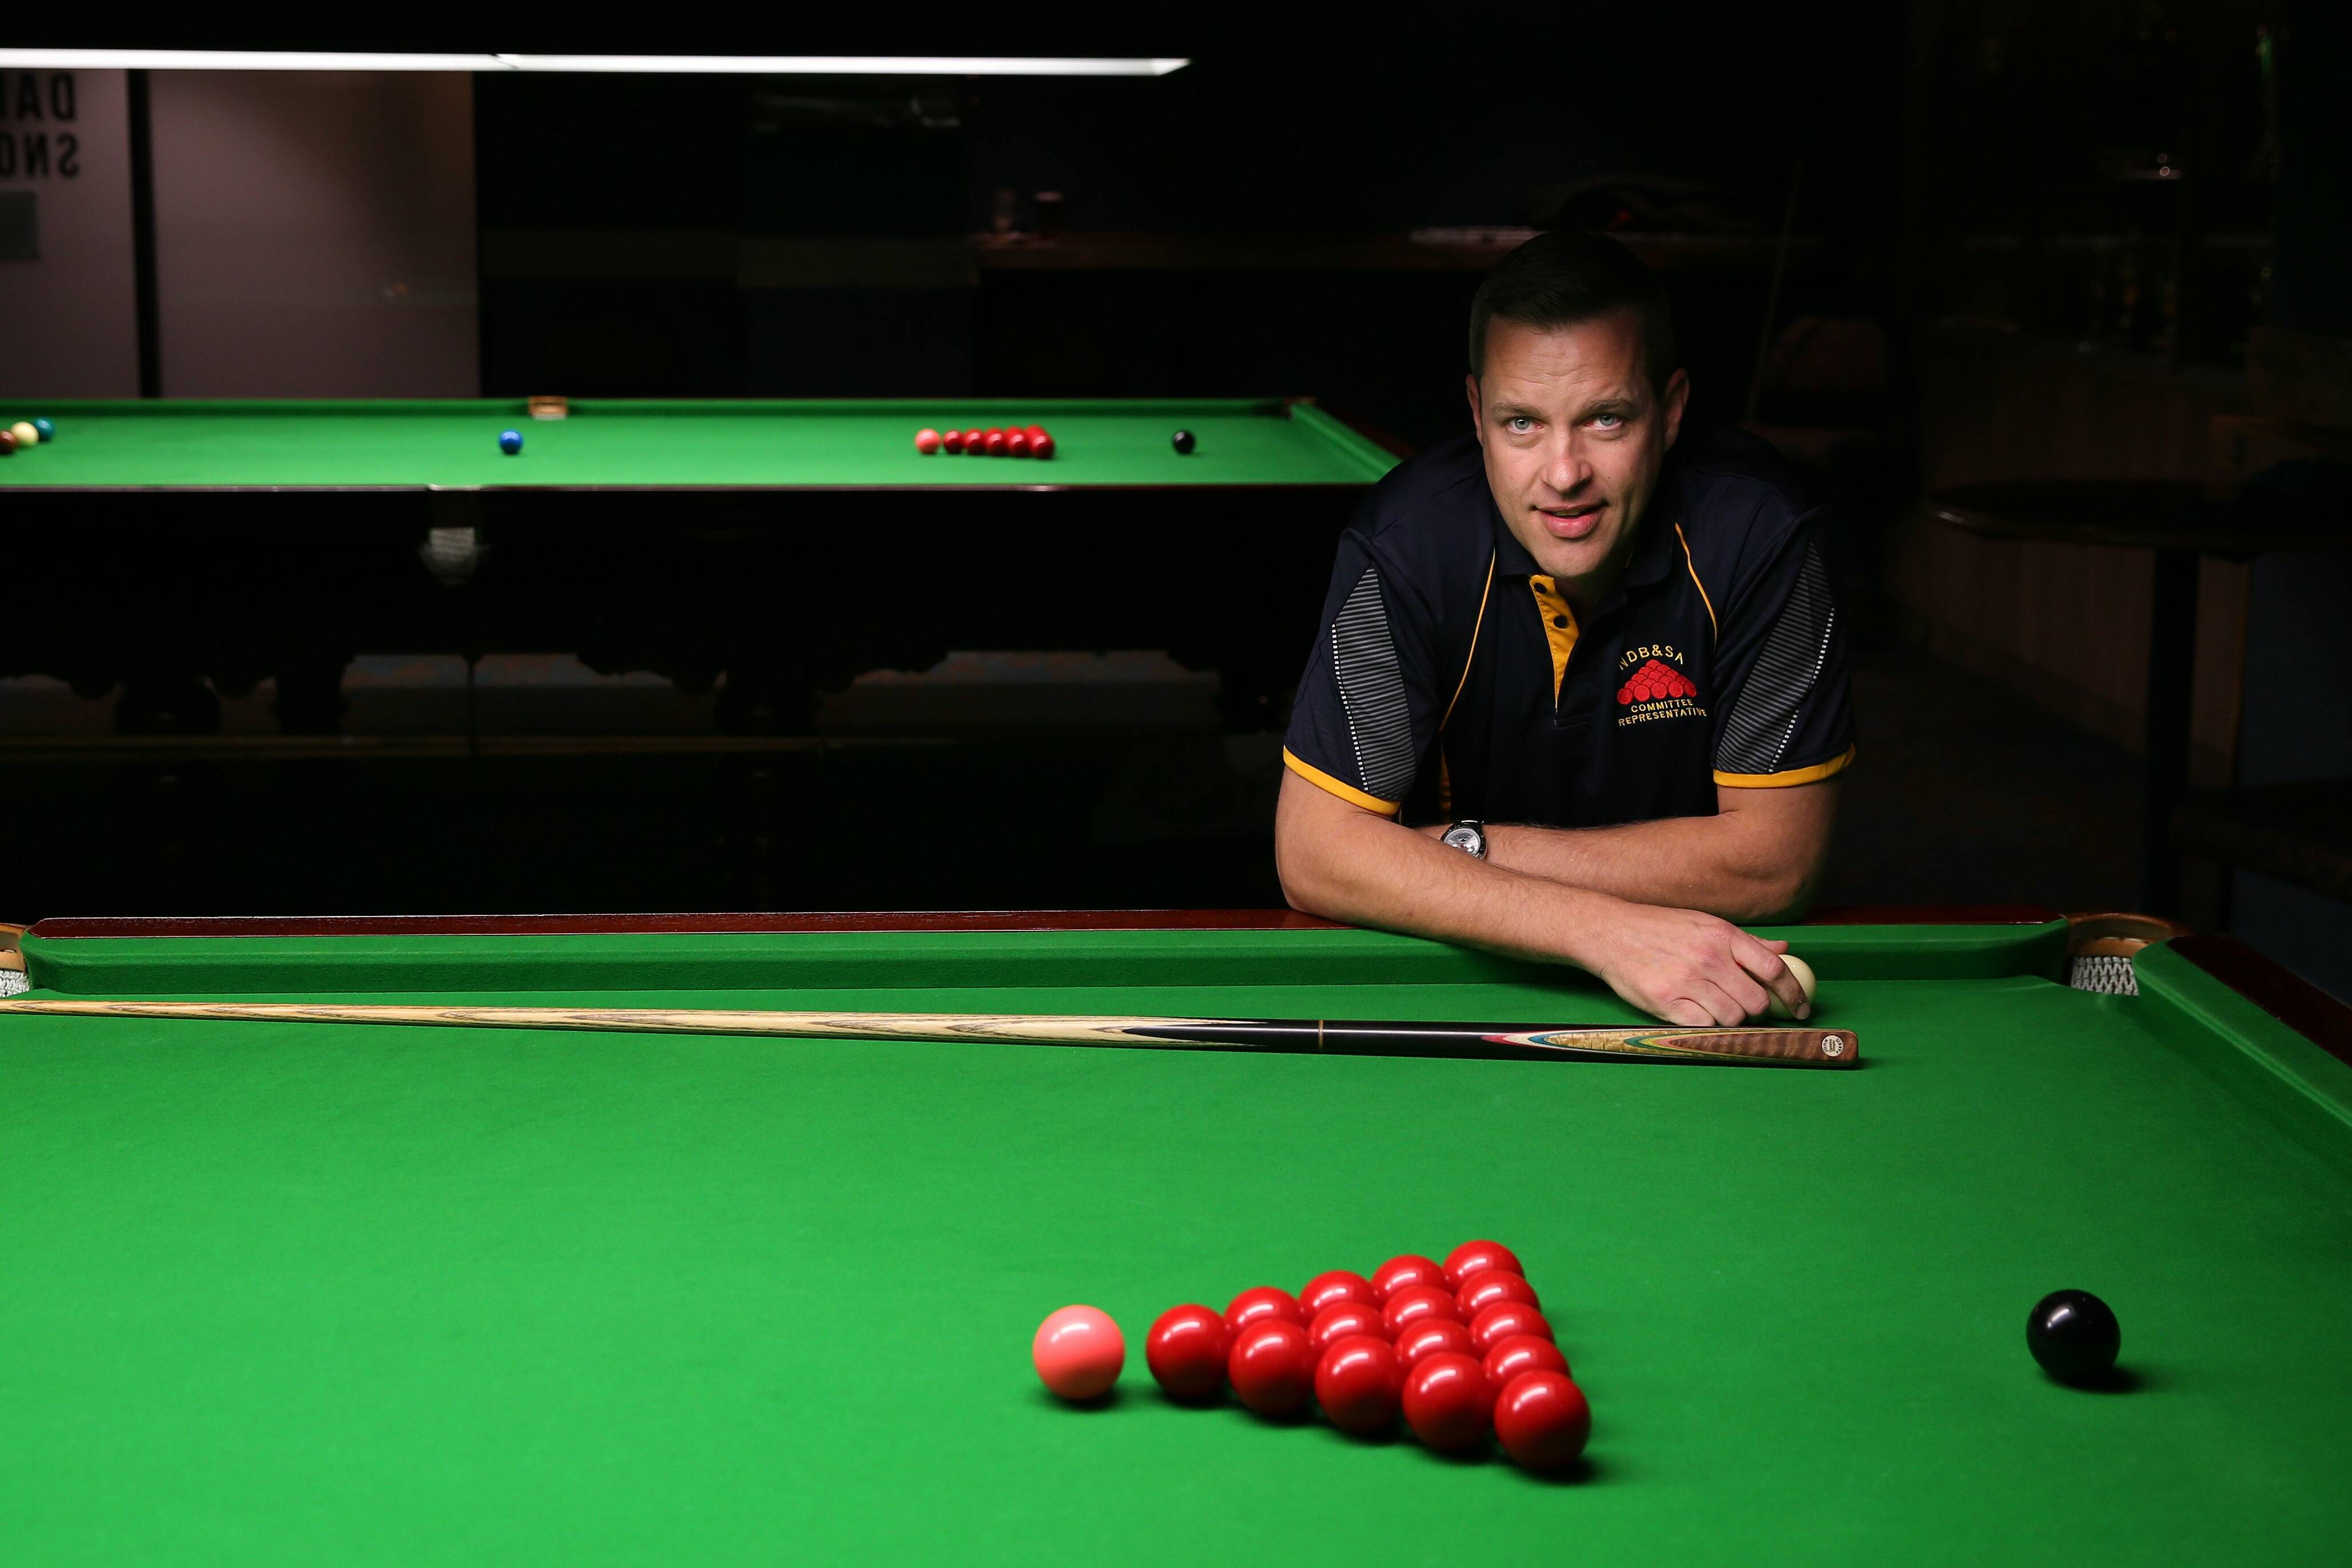 World Snooker Federation Championships — Snooker and Billiards NSW